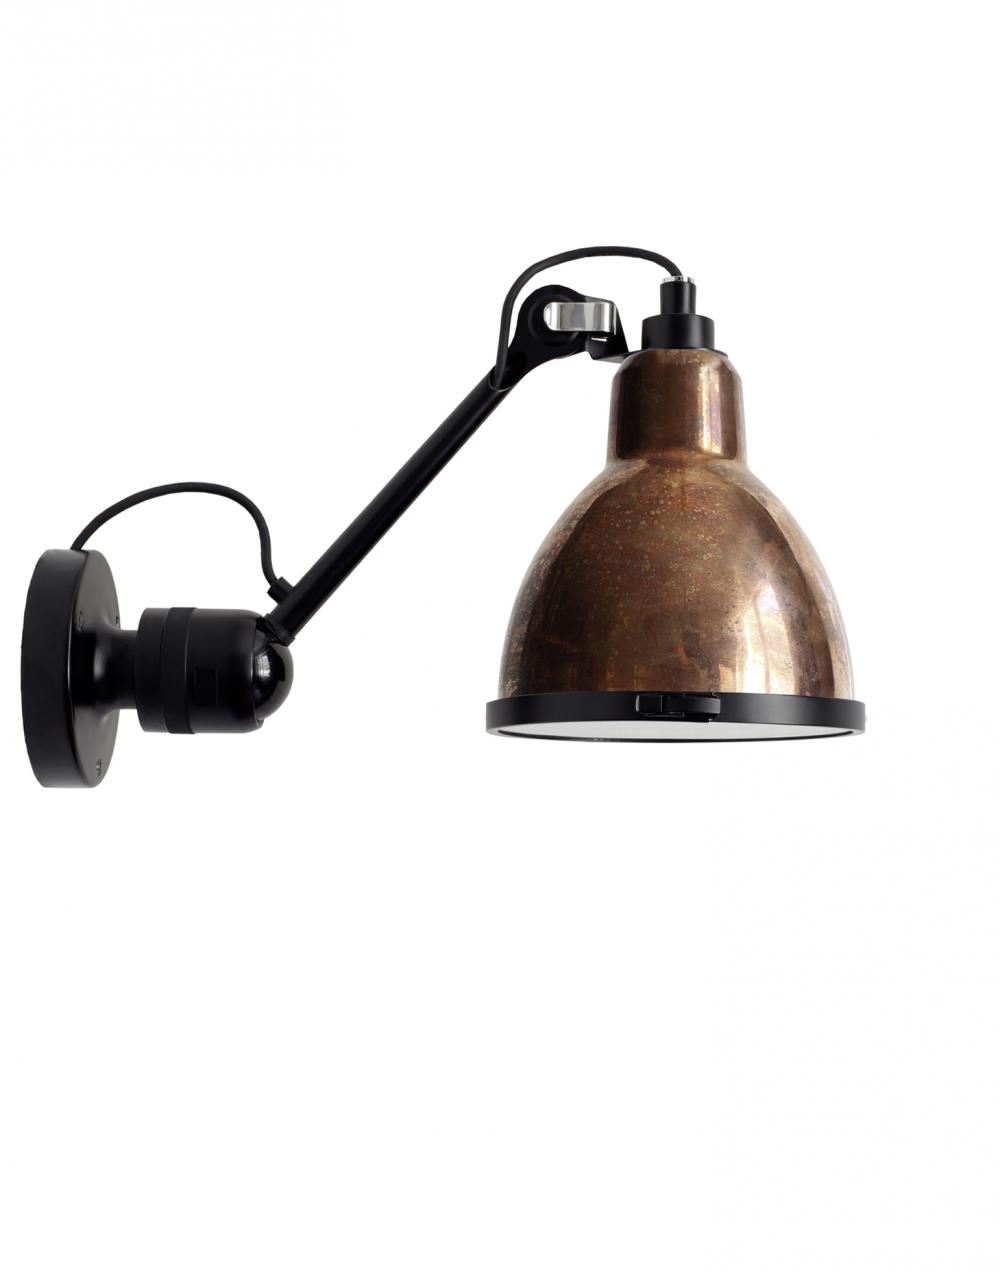 Lampe Gras 304 Xl Outdoor Wall Light Black Arm Raw Copper Shade With White Interior Round